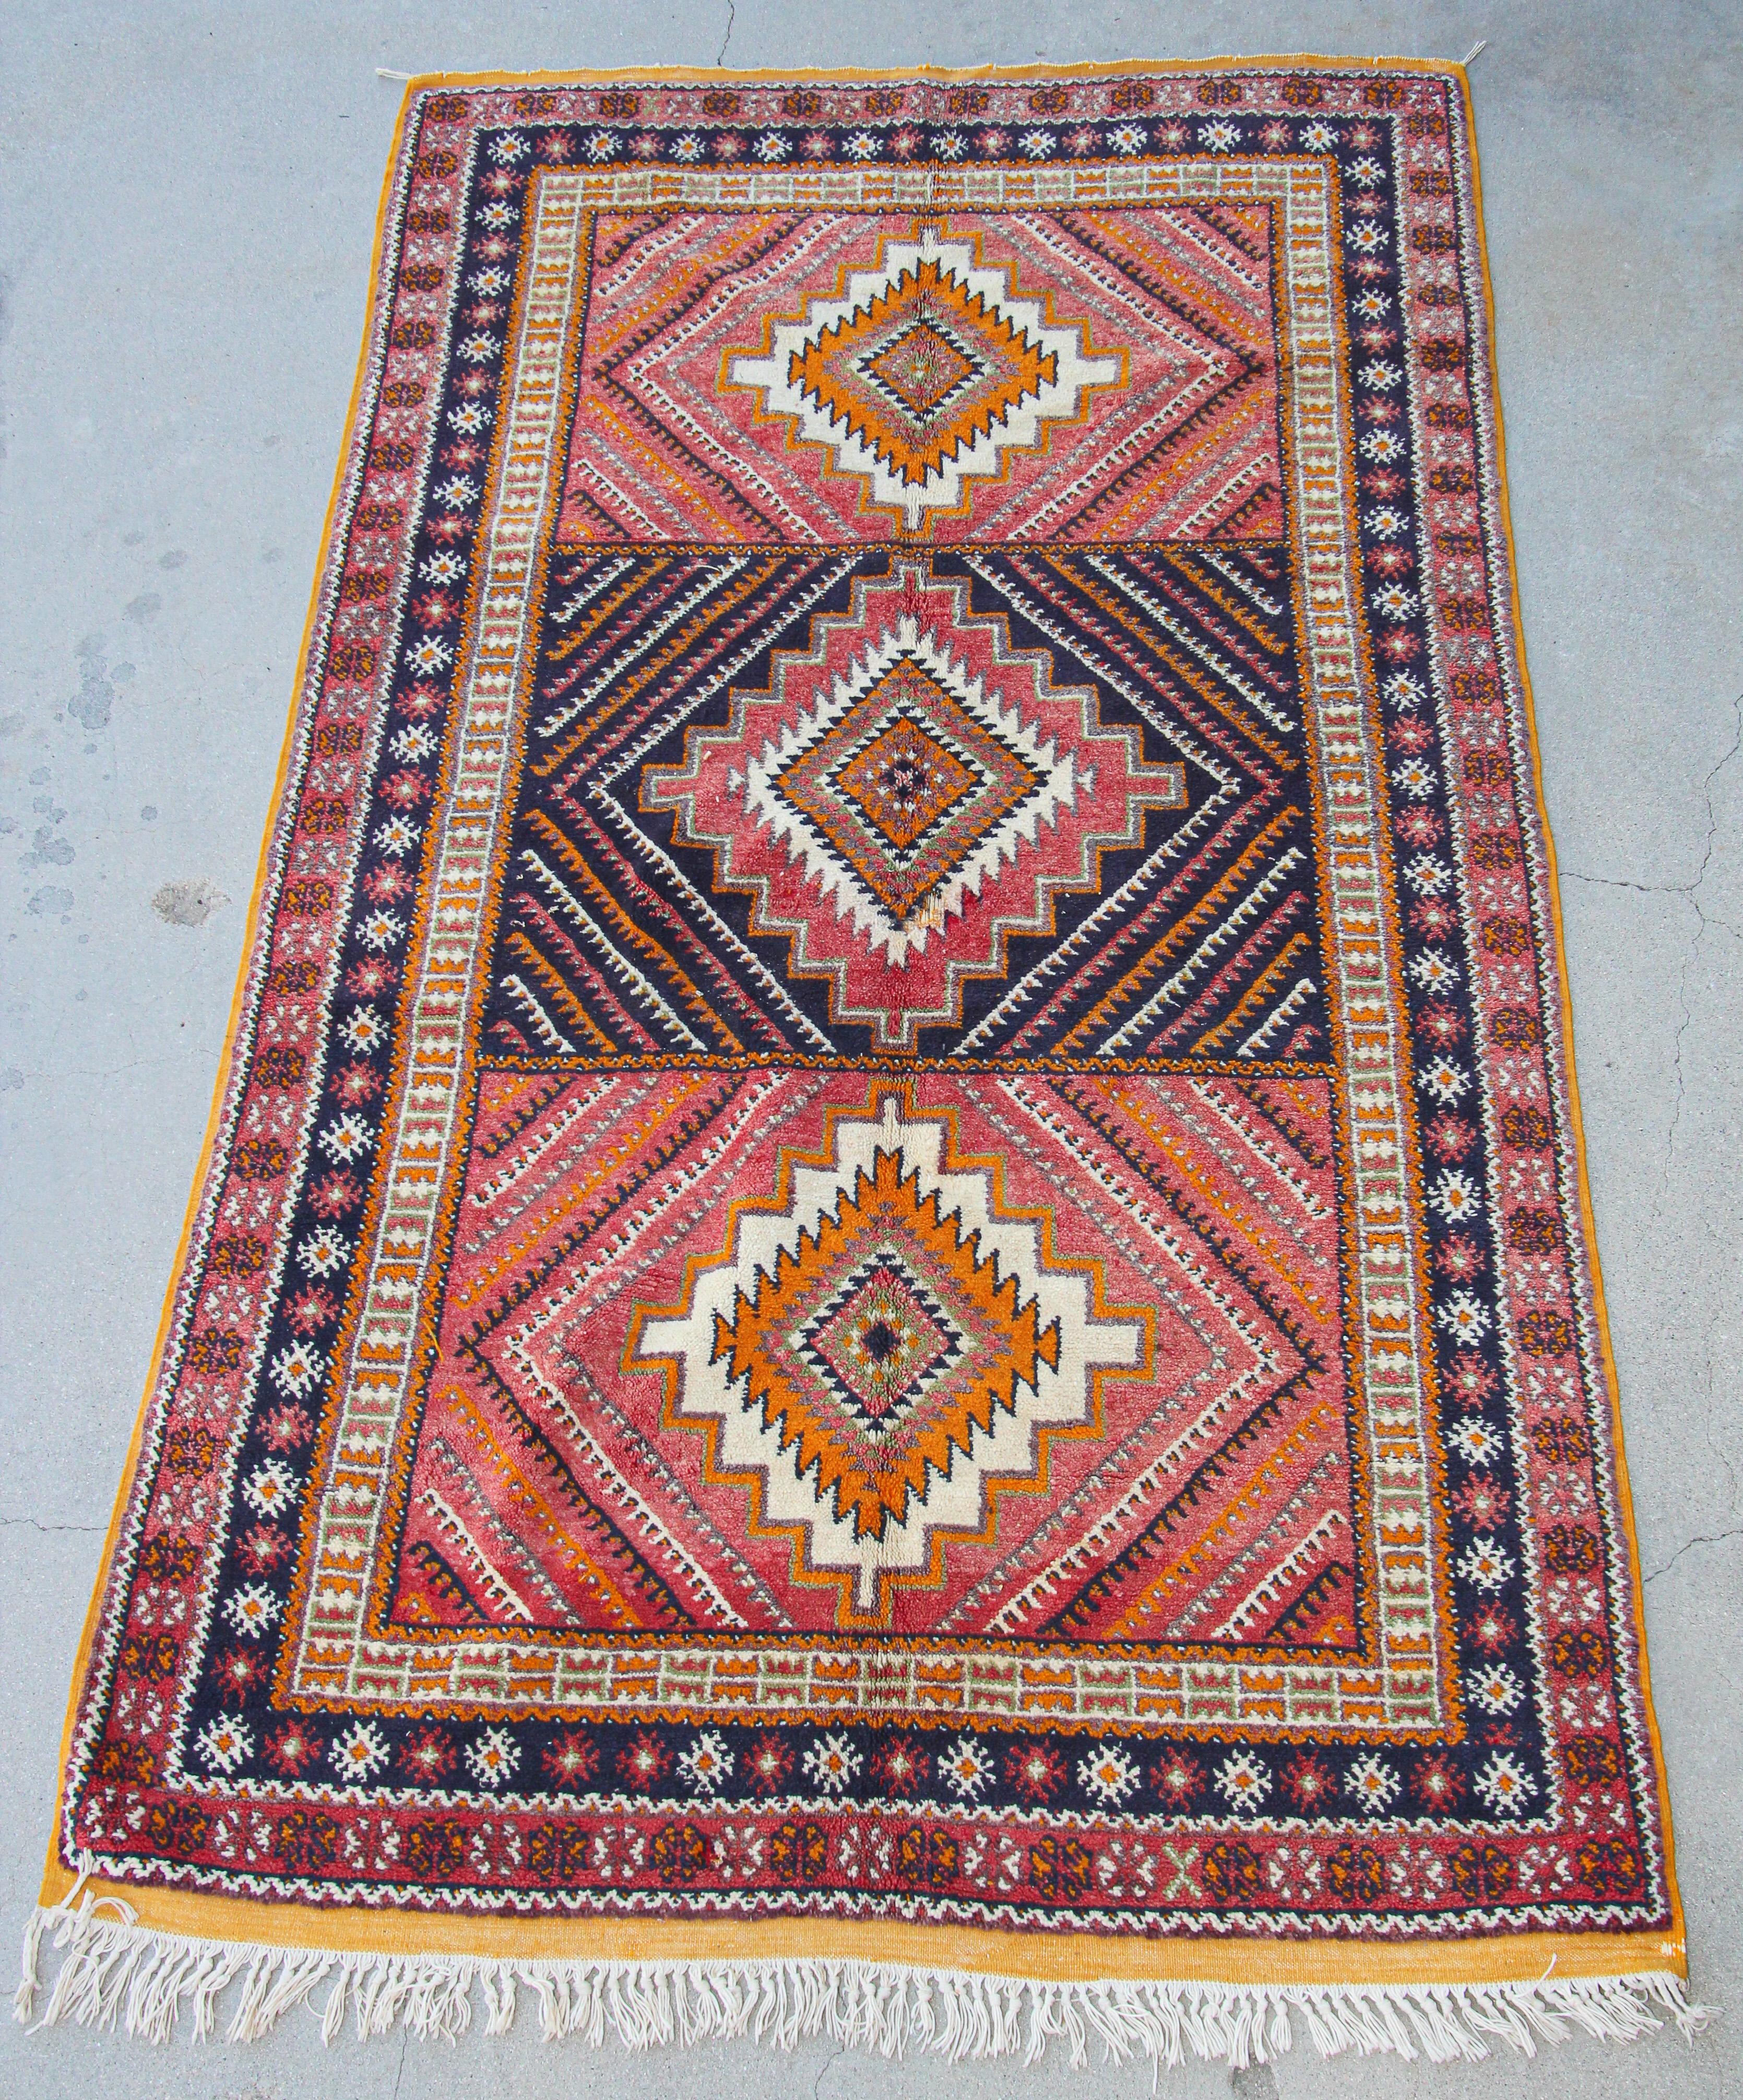 1960s authentic Moroccan vintage rug handwoven by Berber Moroccan women using organic lamb wo and organic dye.North African Moroccan tribal runner with low pile handwoven wo, hand-knotted by the Berber tribes of Morocco with traditional geometric